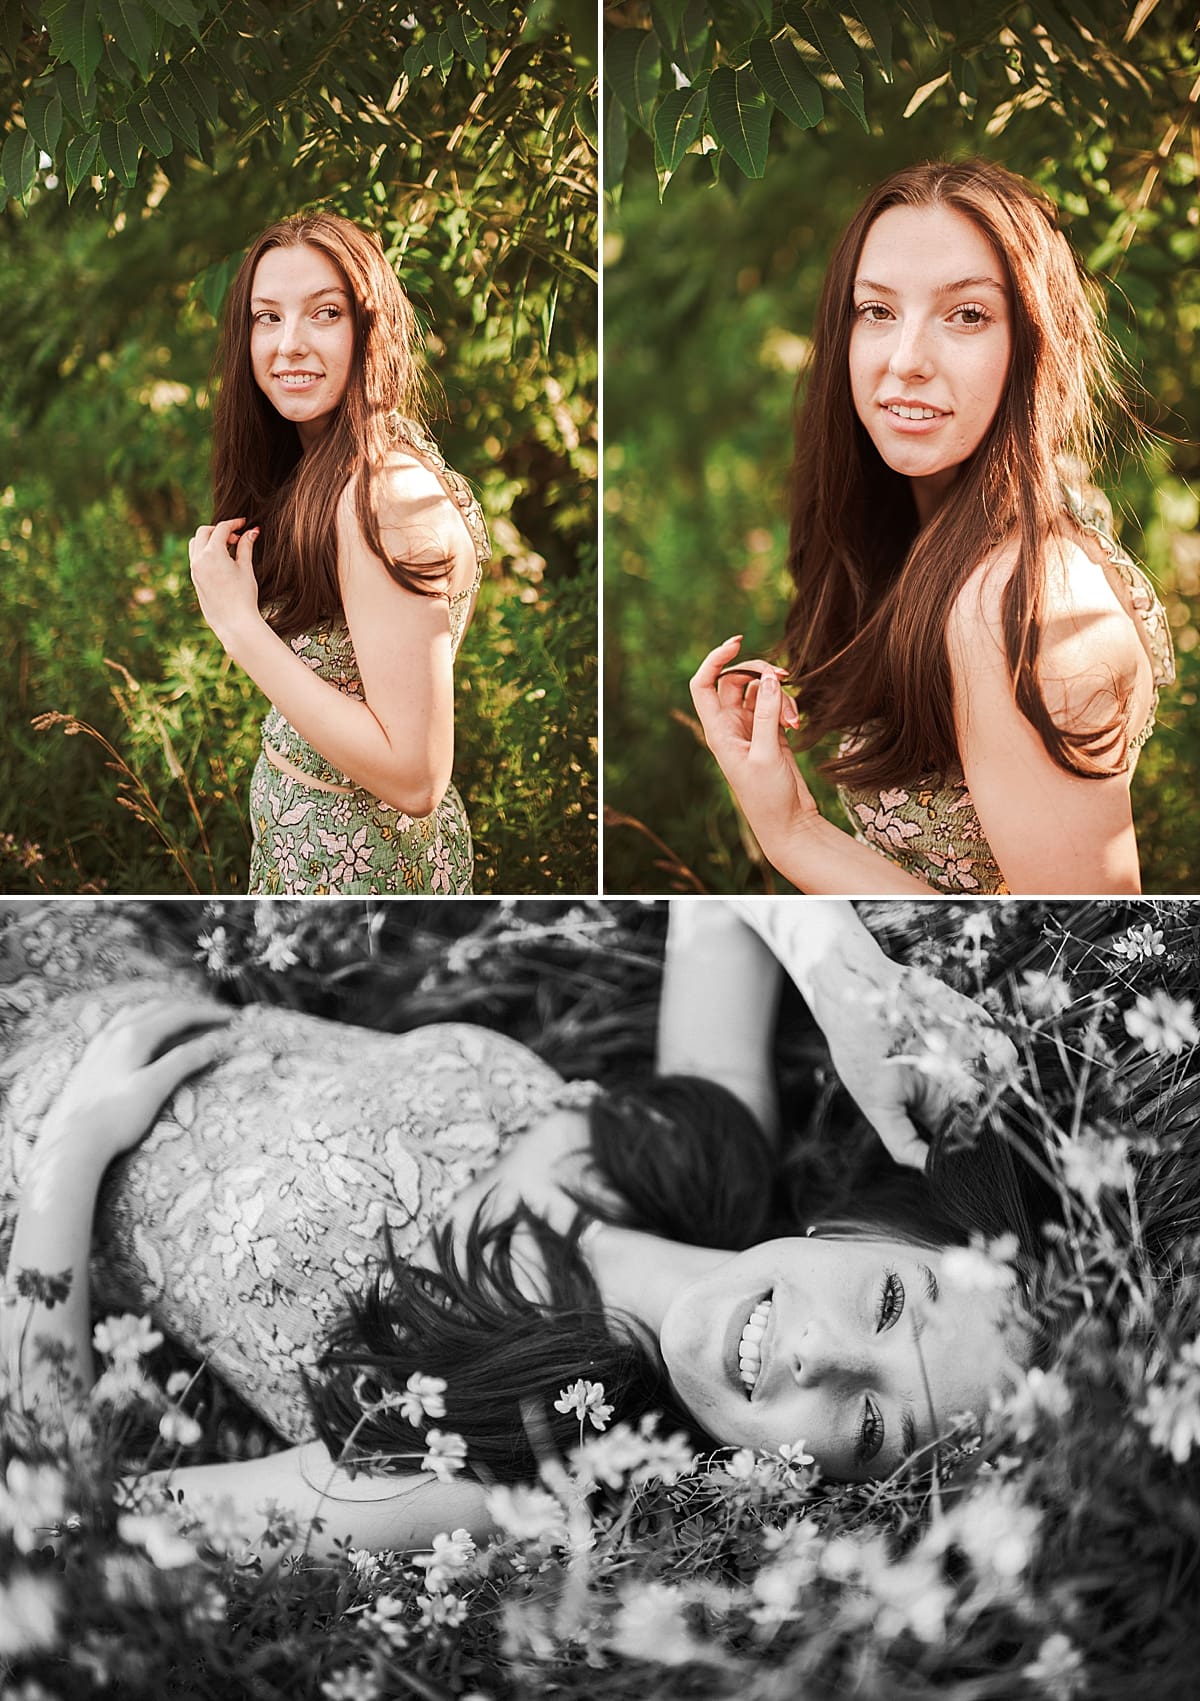 senior girl laying in a field of flowers